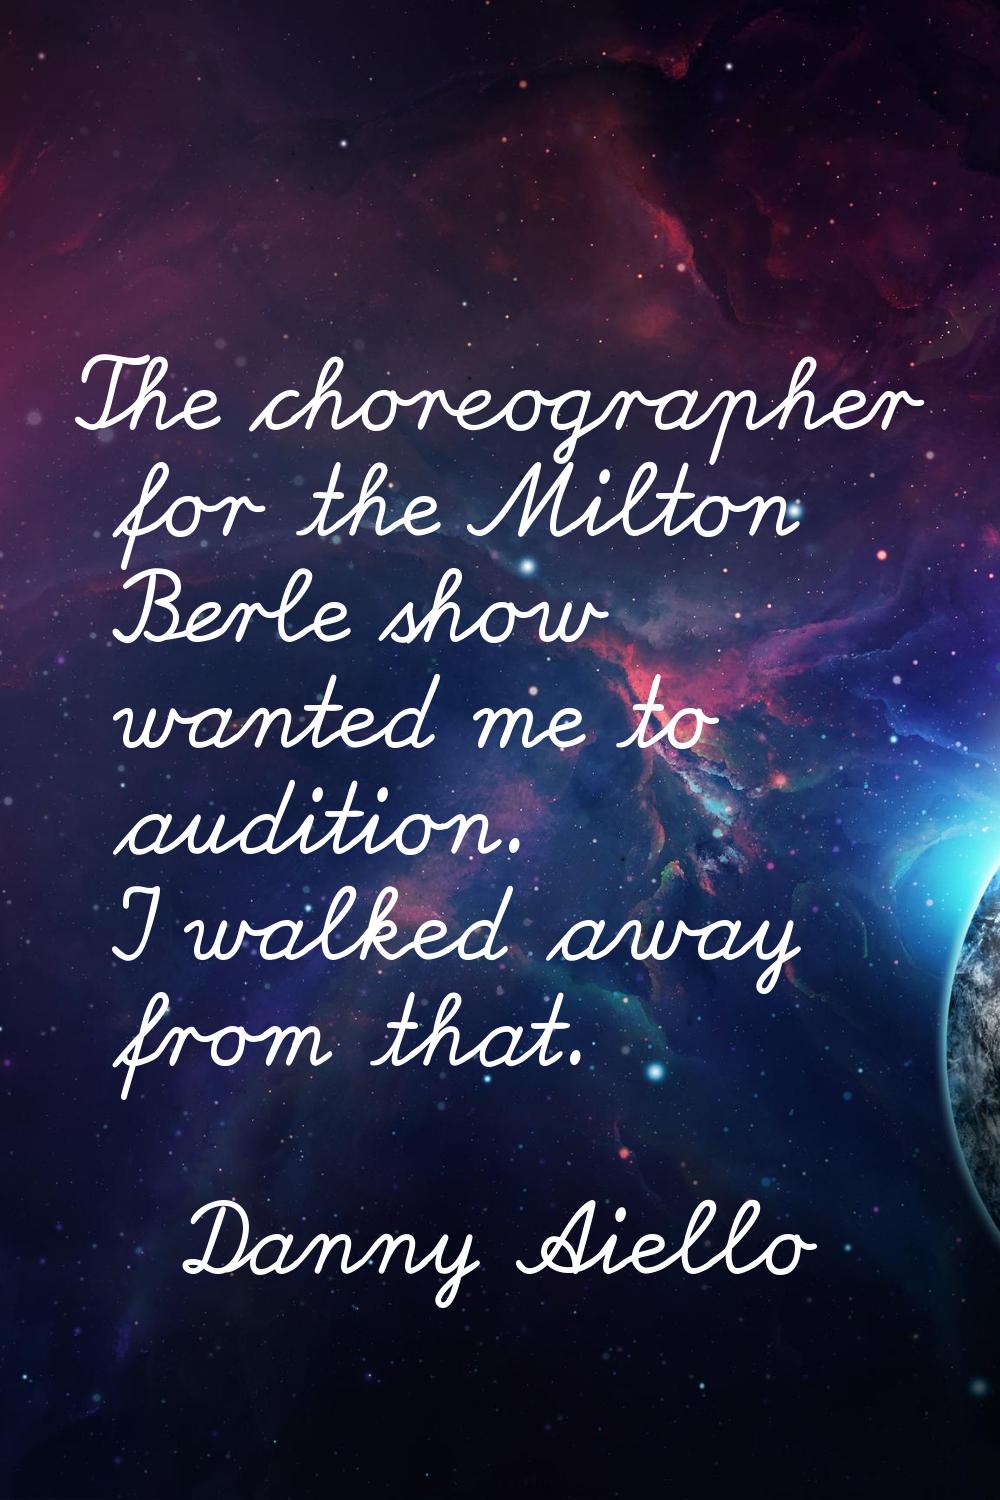 The choreographer for the Milton Berle show wanted me to audition. I walked away from that.